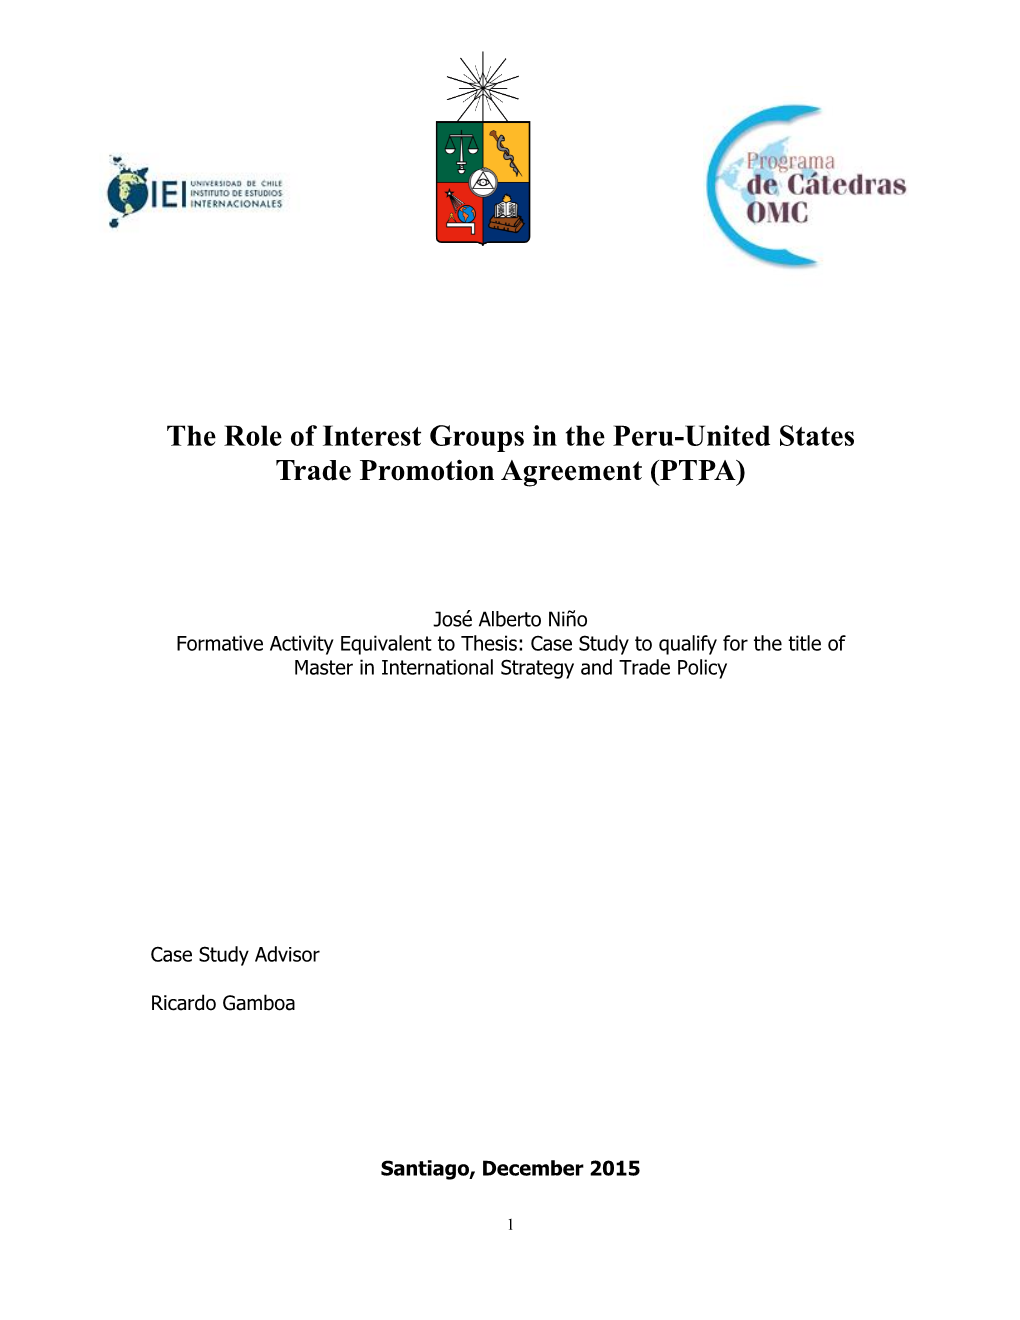 The Role of Interest Groups in the Peru-United States Trade Promotion Agreement (PTPA)